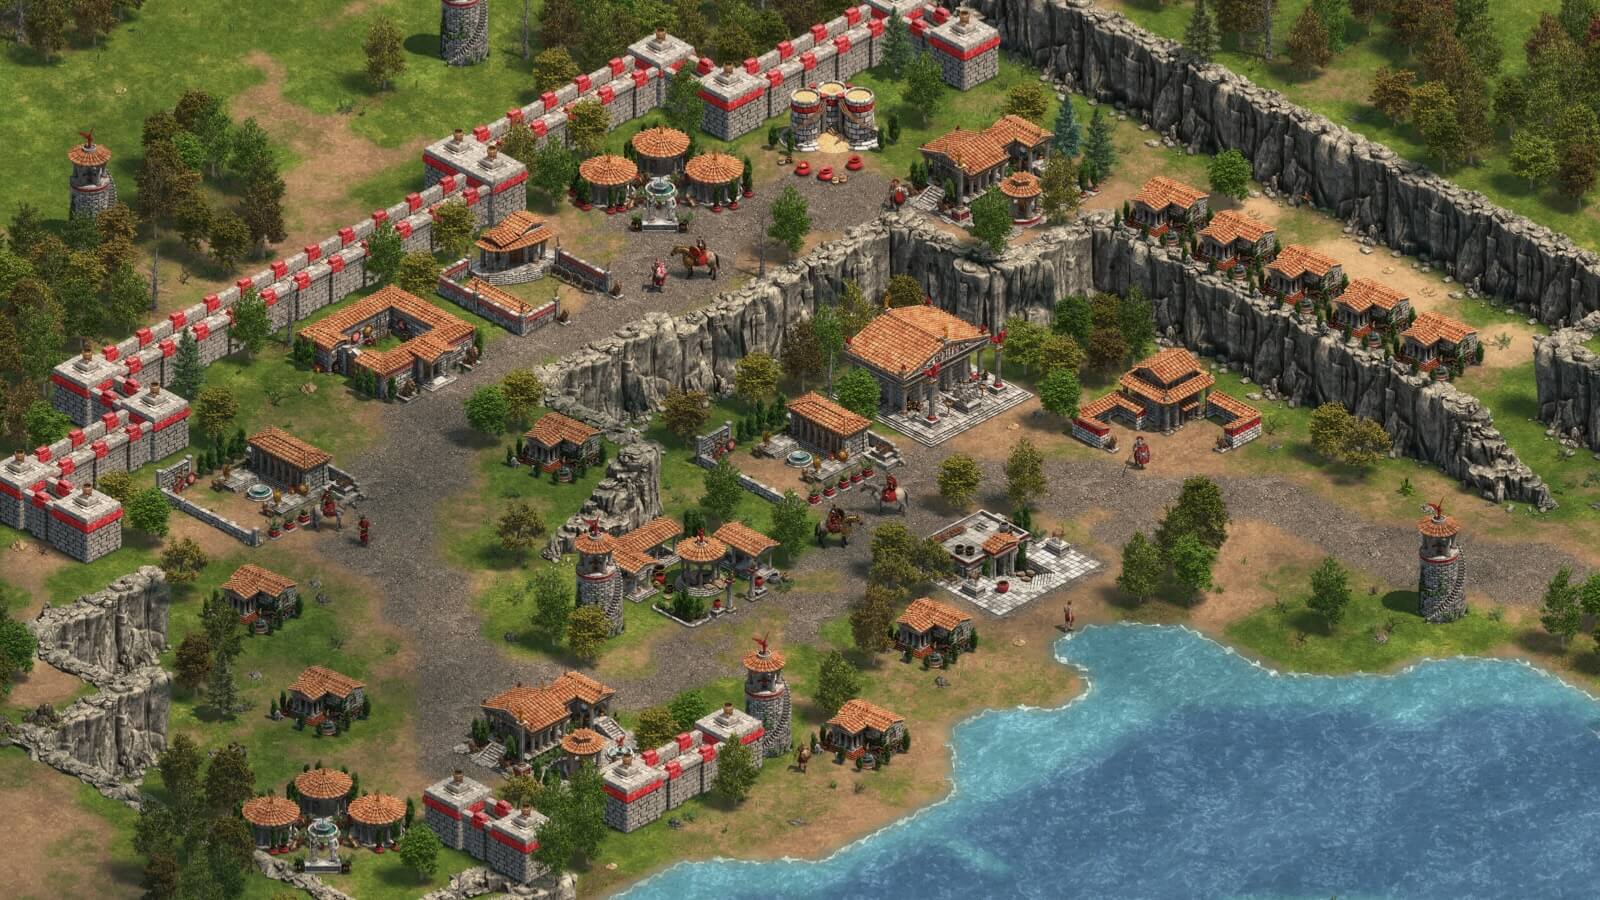 Age of Empires: Definitive Edition Announced